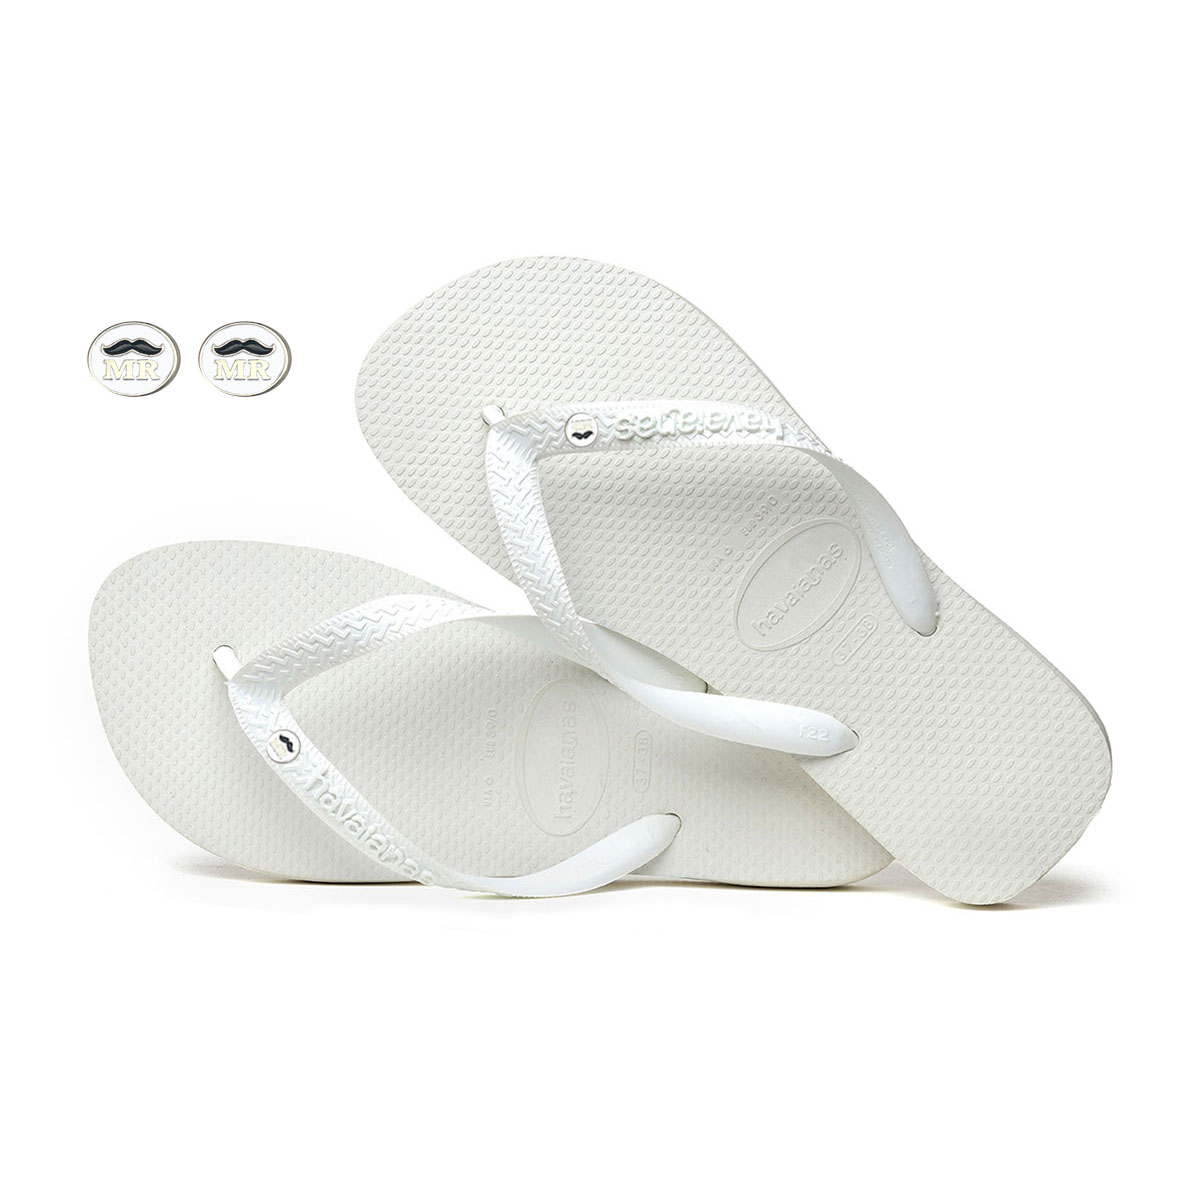 Mr and Mr Silver Charm Havaianas Top White Wedding Gift